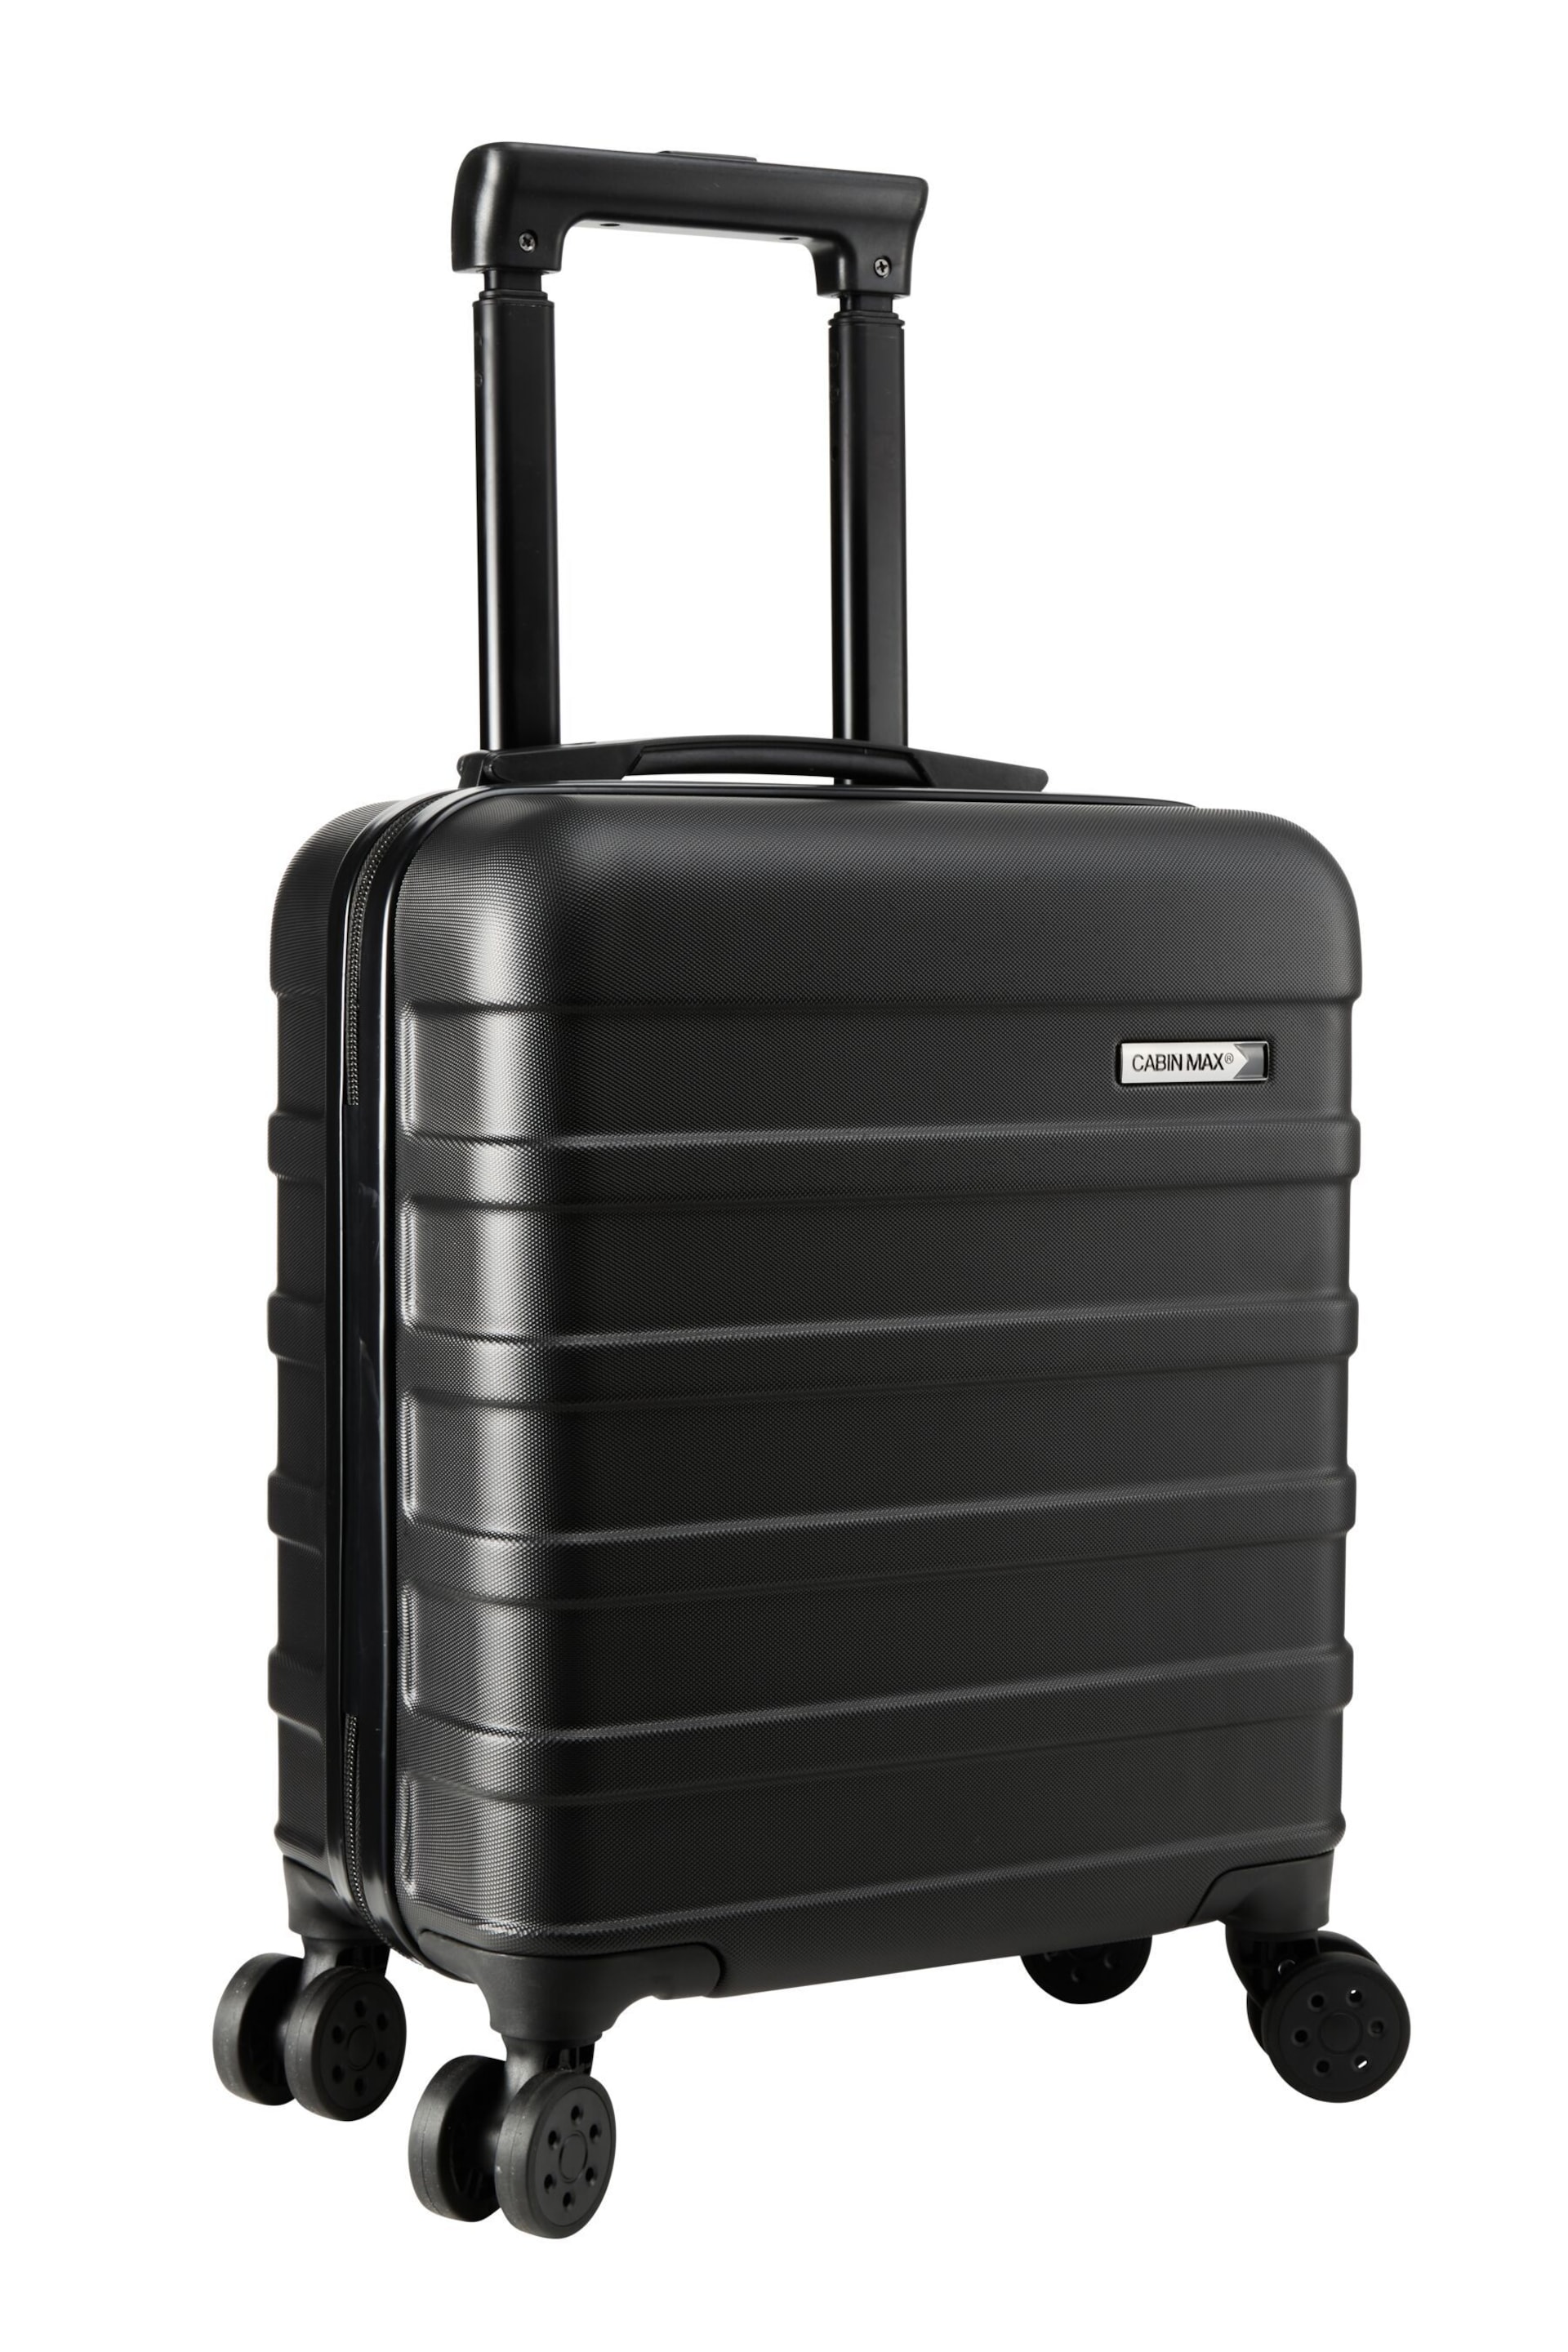 Cabin Max Anode Four Wheel Carry On Easyjet Sized Underseat 45cm Suitcase - Image 4 of 6